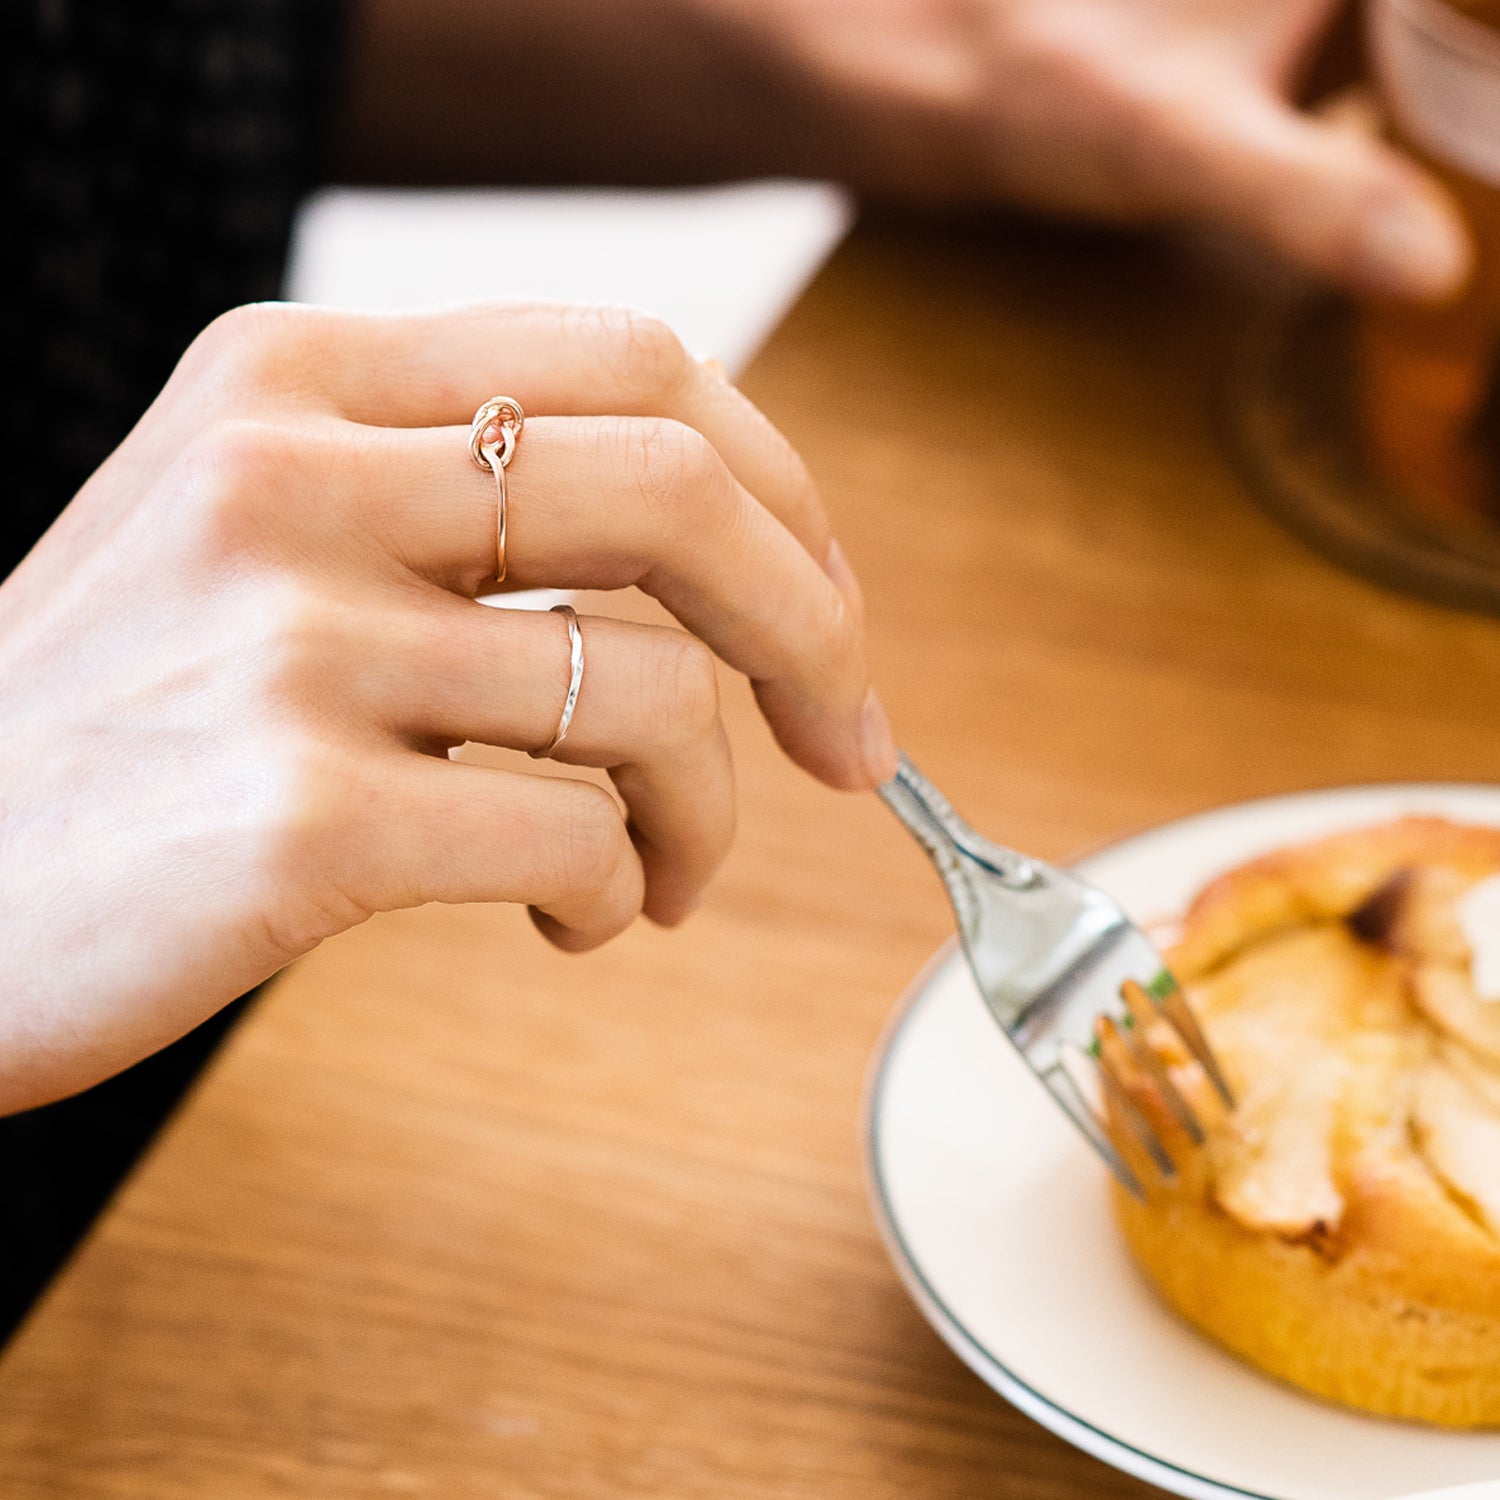 slim rose gold knot ring, being worn, hand holding a fork